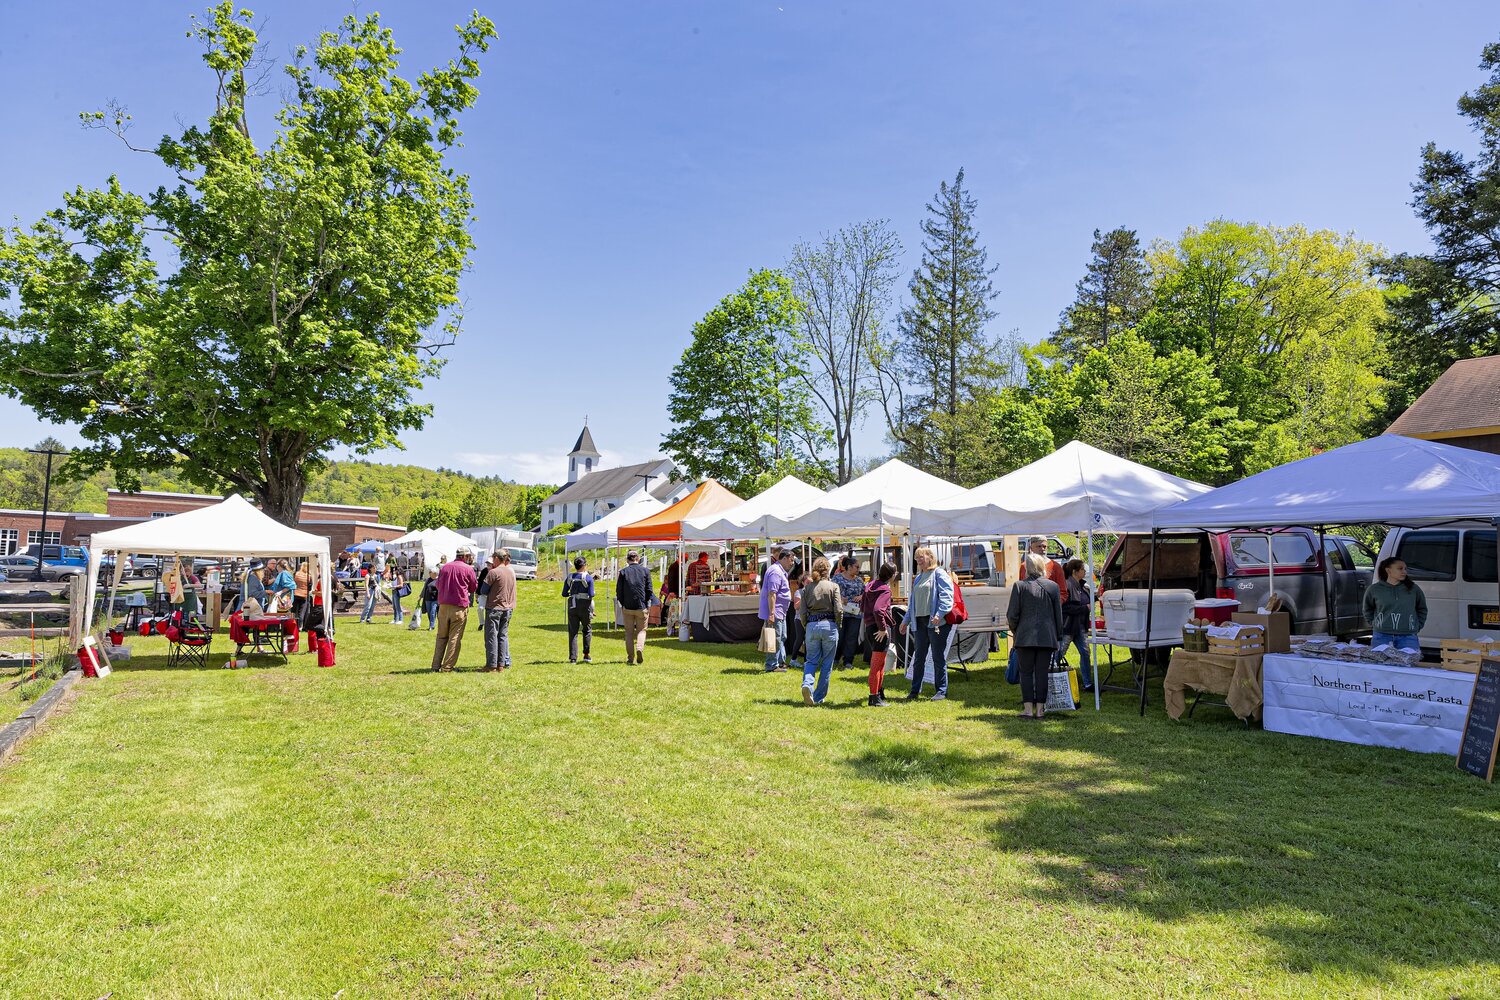 The Narrowsburg Farmers' Market opens on Saturday, May 20.